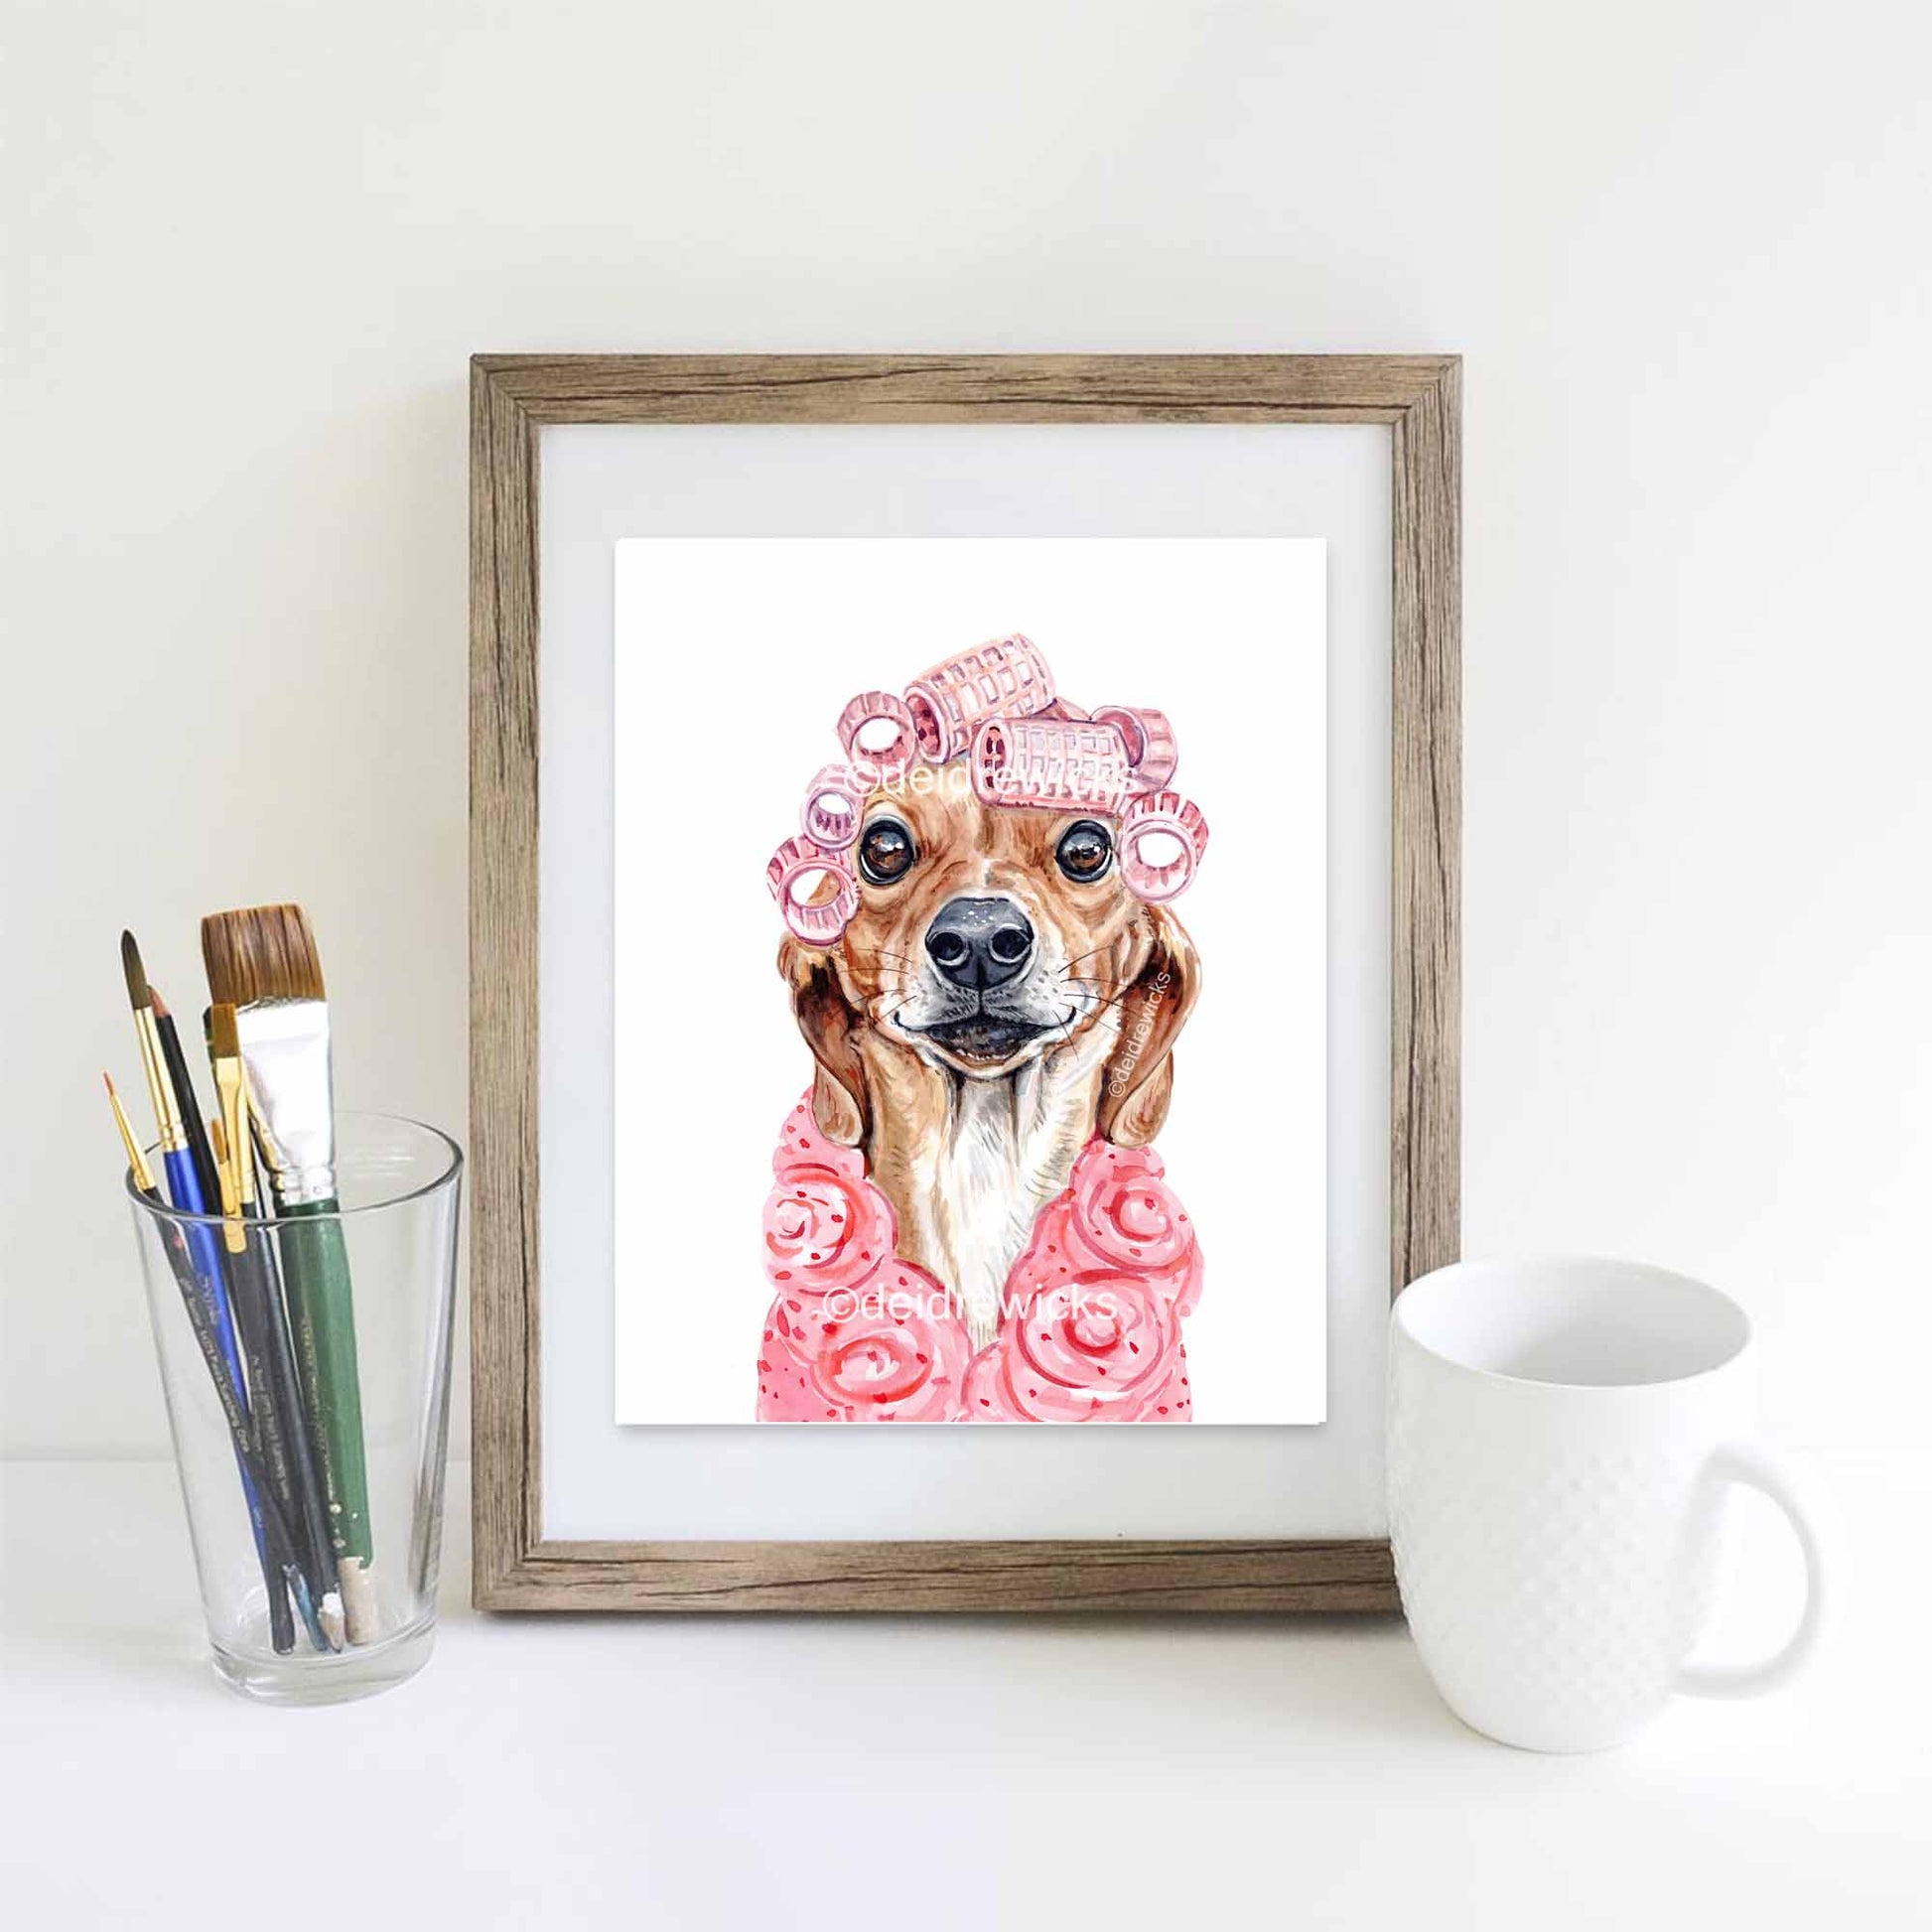 Framed watercolour painting of a dachshund dog wearing a pink bathrobe and hair curlers by artist Deidre Wicks